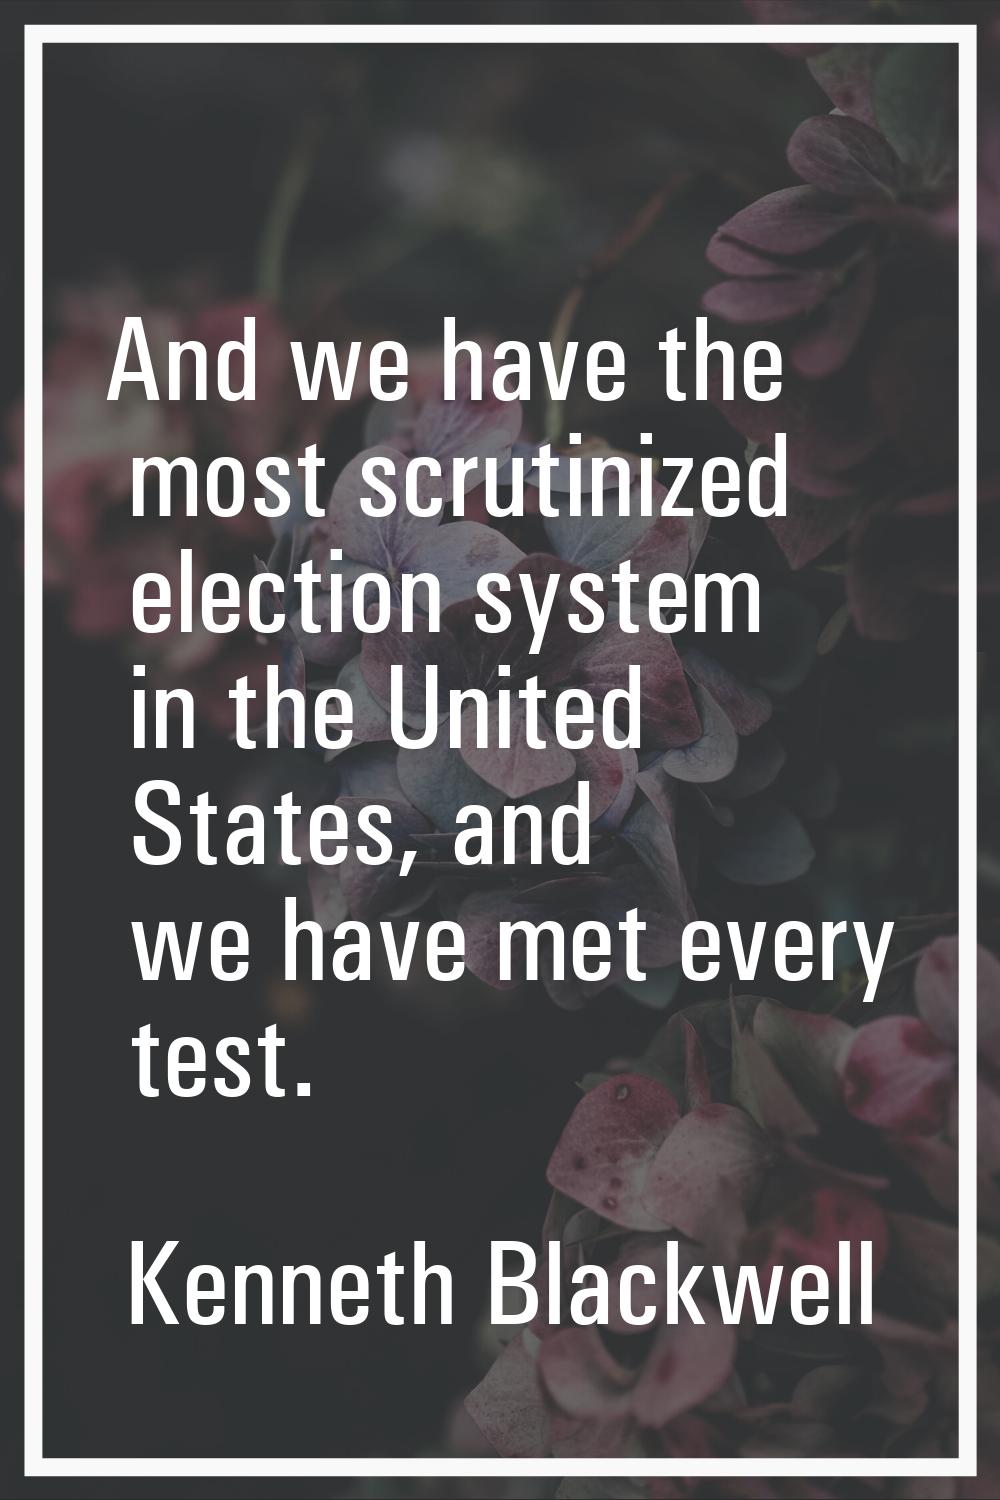 And we have the most scrutinized election system in the United States, and we have met every test.